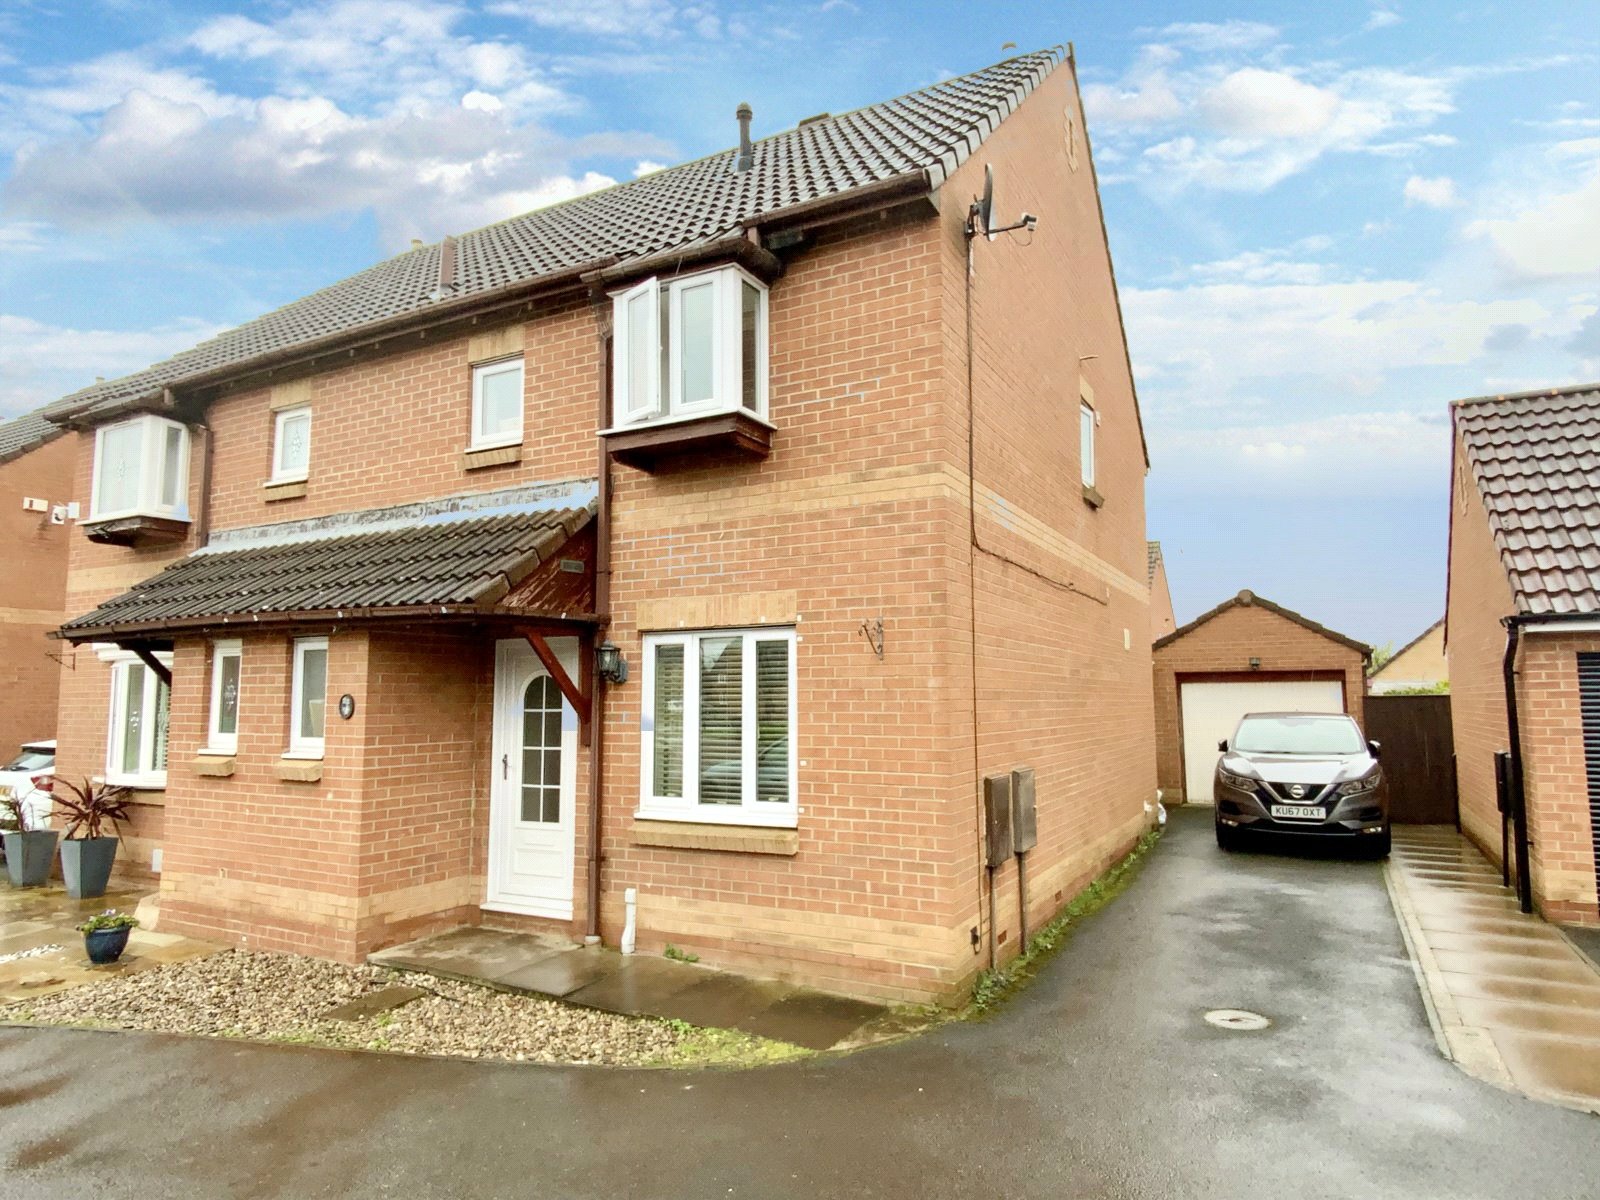 3 bed house for sale in Holystone Drive, Ingleby Barwick 1